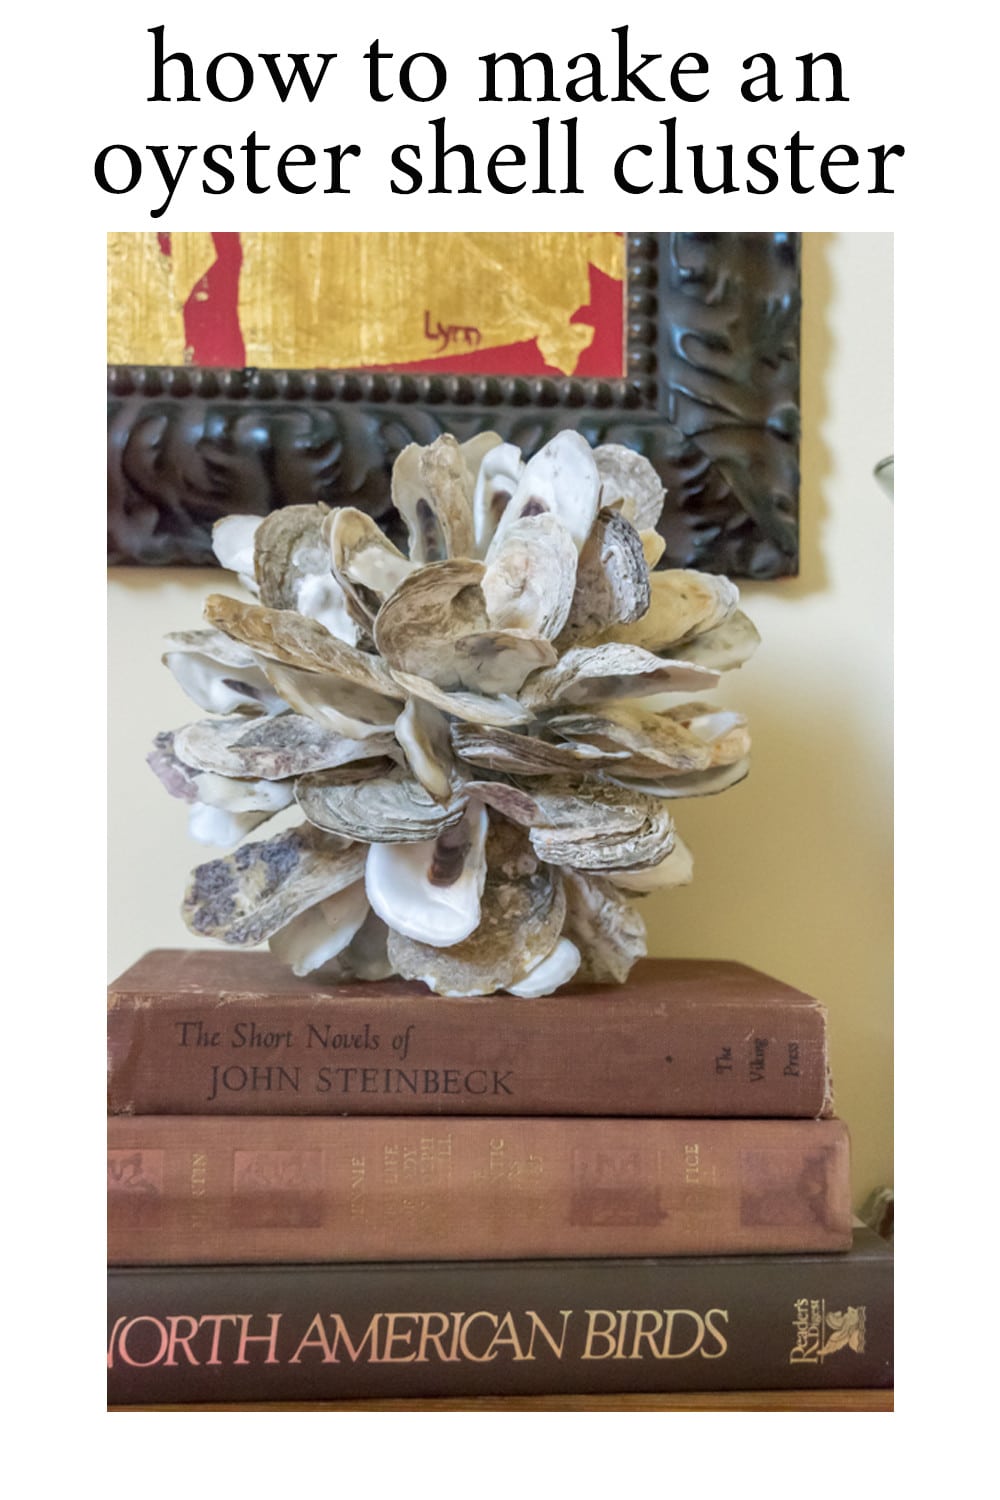 oyster shell cluster on books